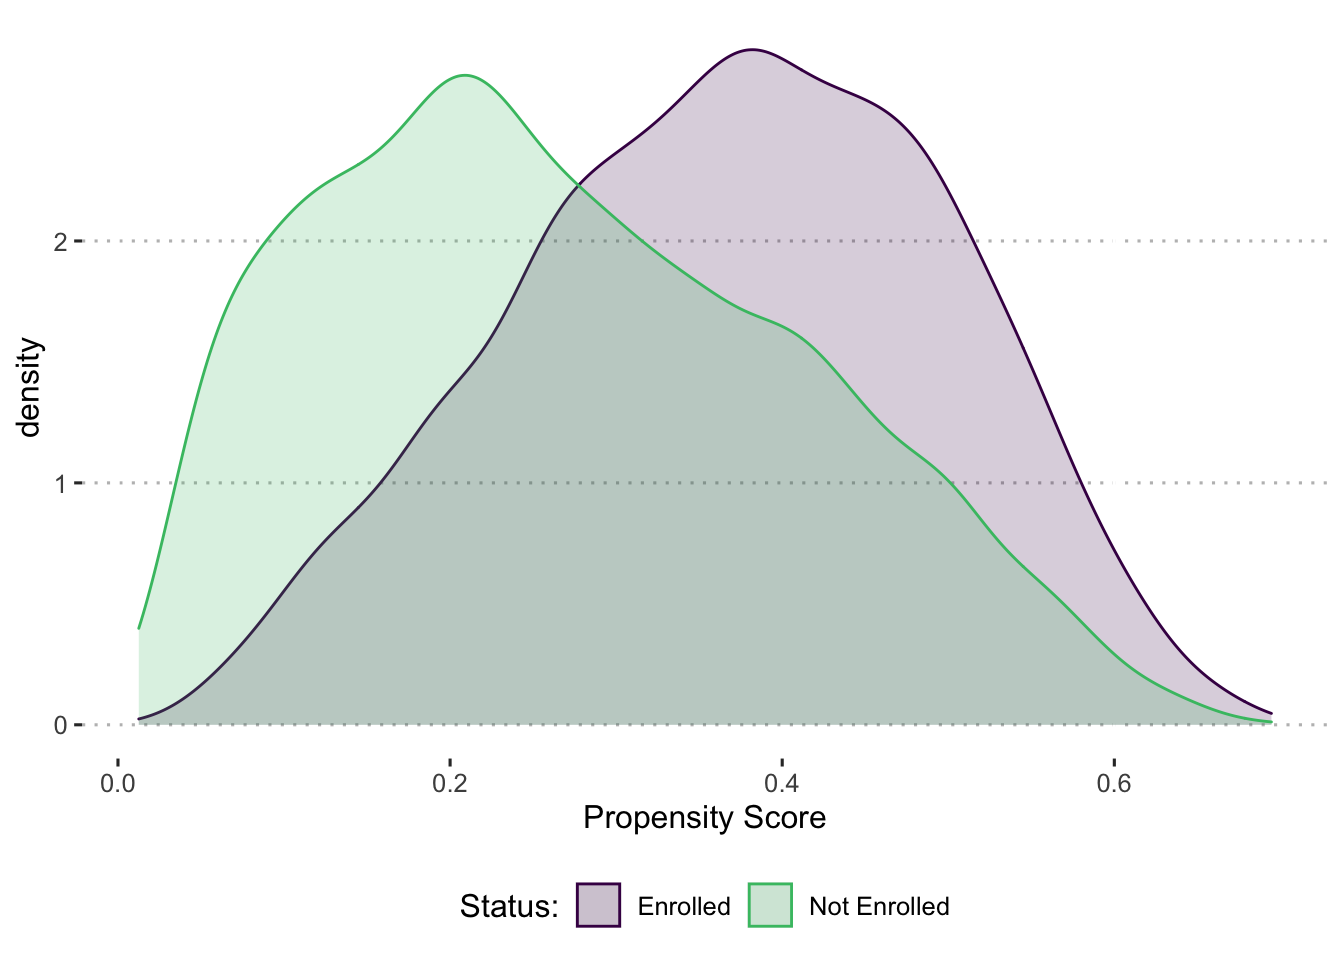 Distribution of Propensity Score by Enrollment Status